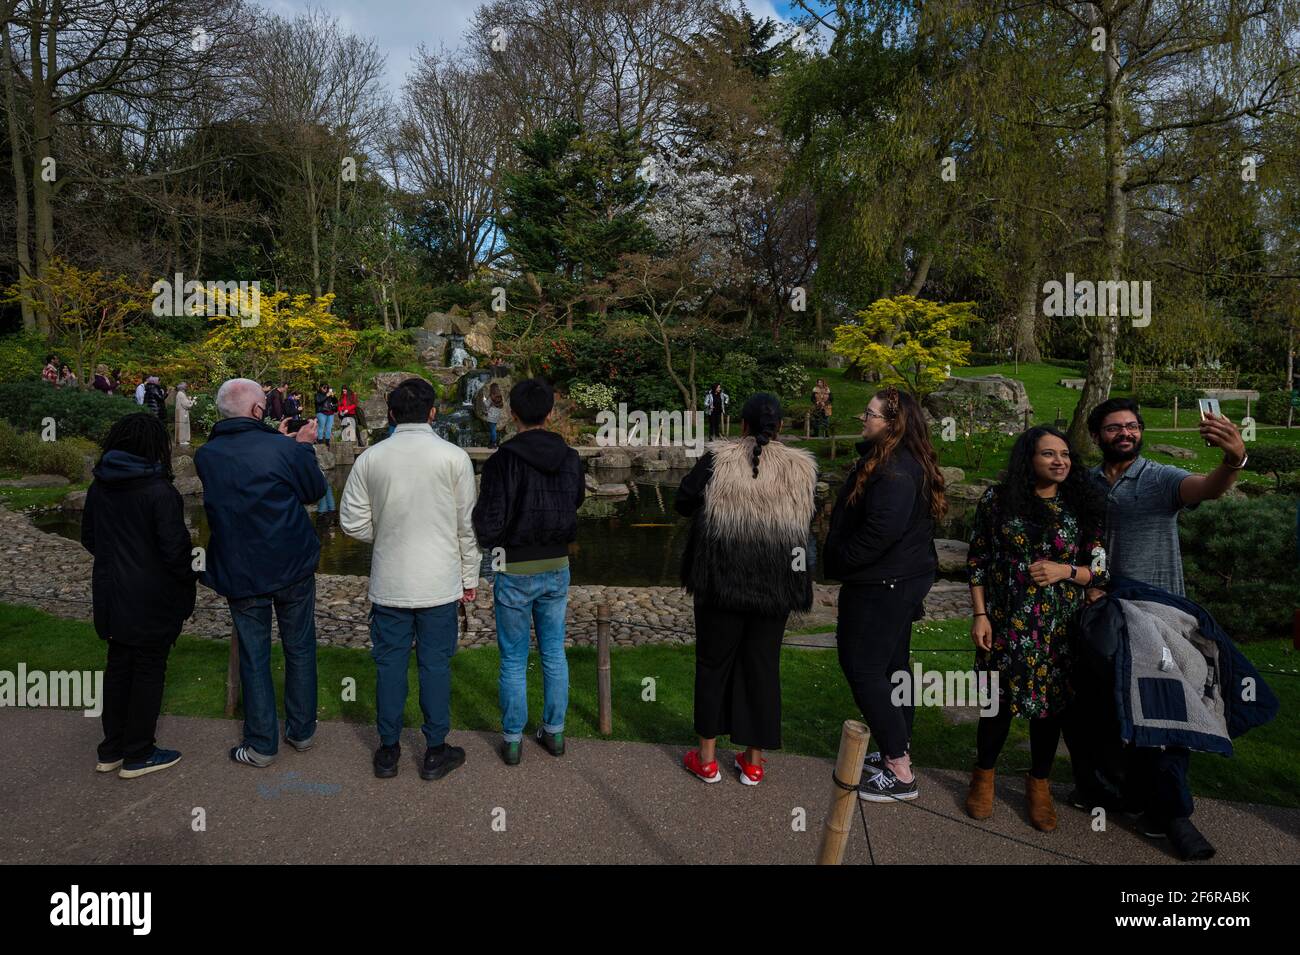 London, UK.  2 April 2021.  UK Weather:  People visit the Kyoto Garden in Holland Park, west London on Good Friday. Usually, the garden is quiet but as it is a public holiday and with lockdown restrictions slightly eased this week, many people have taken to the parks to enjoy the warmer conditions.   Credit: Stephen Chung / Alamy Live News Stock Photo